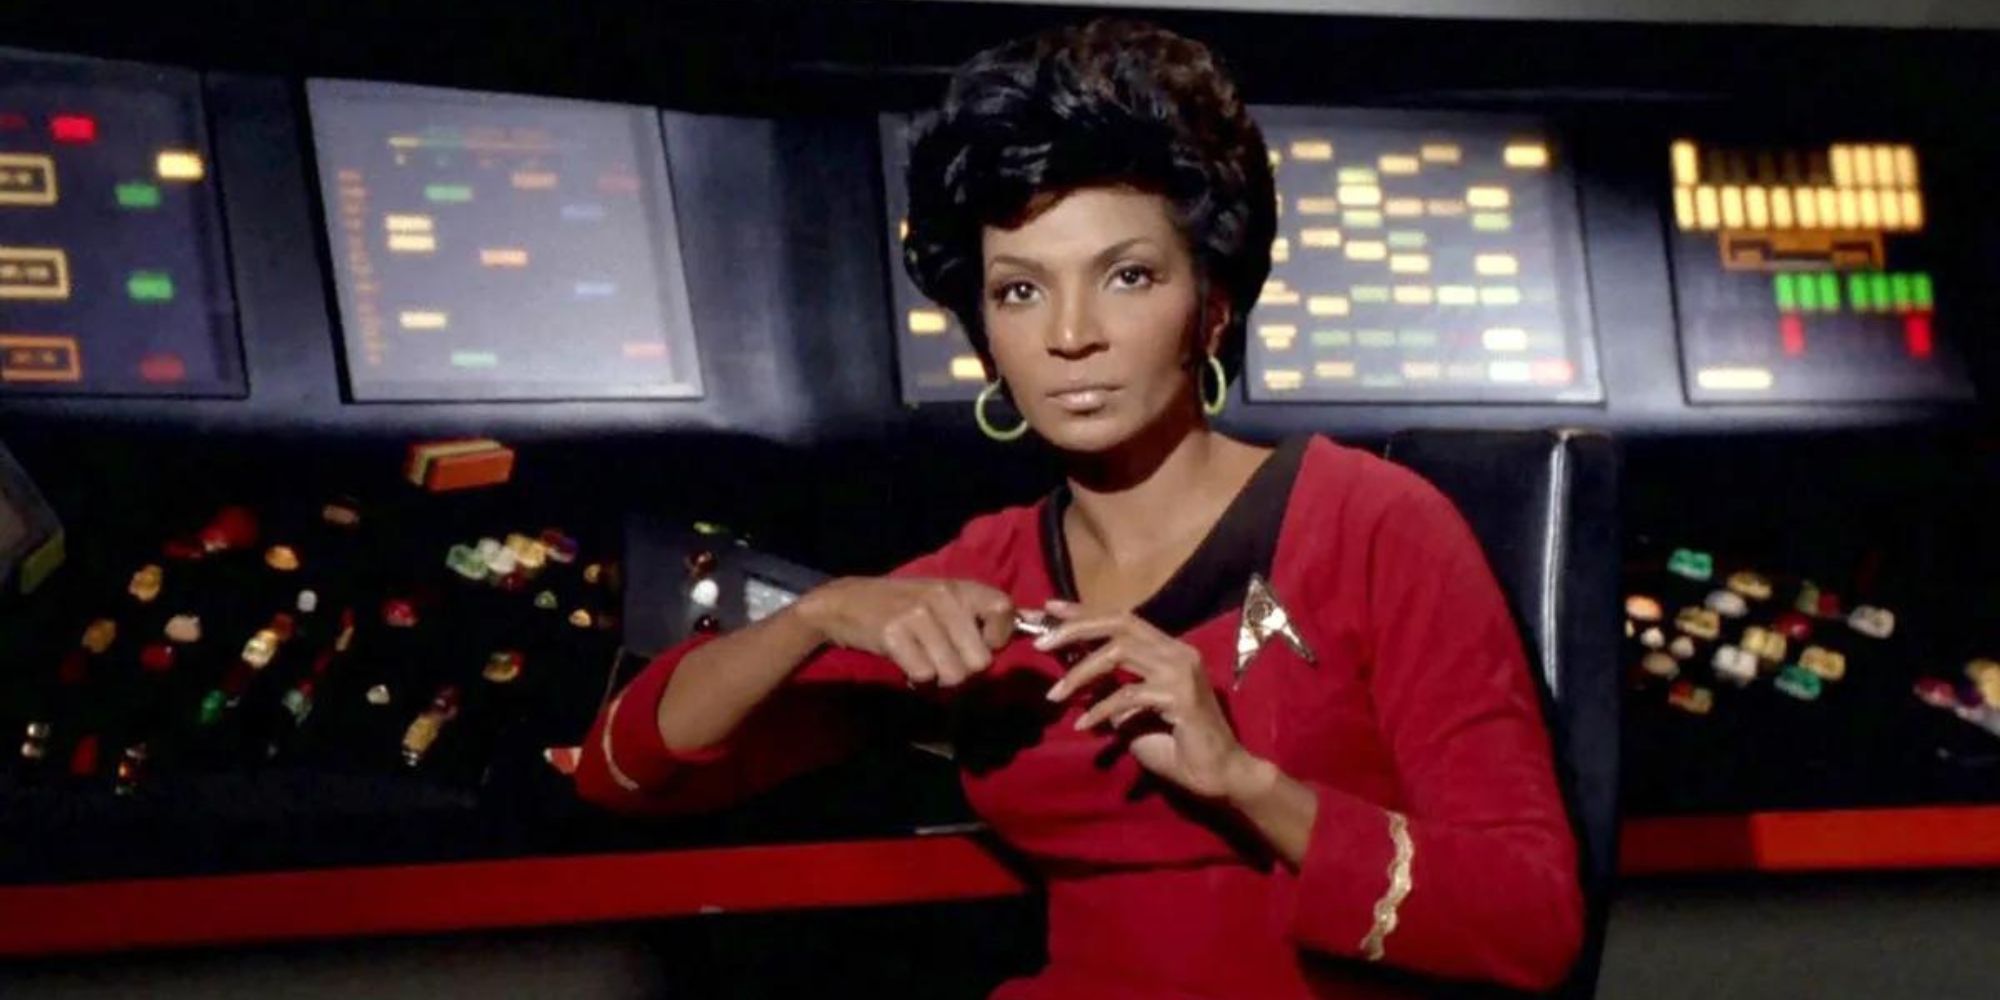 Uhura sits in front of Enterprise communications control panel